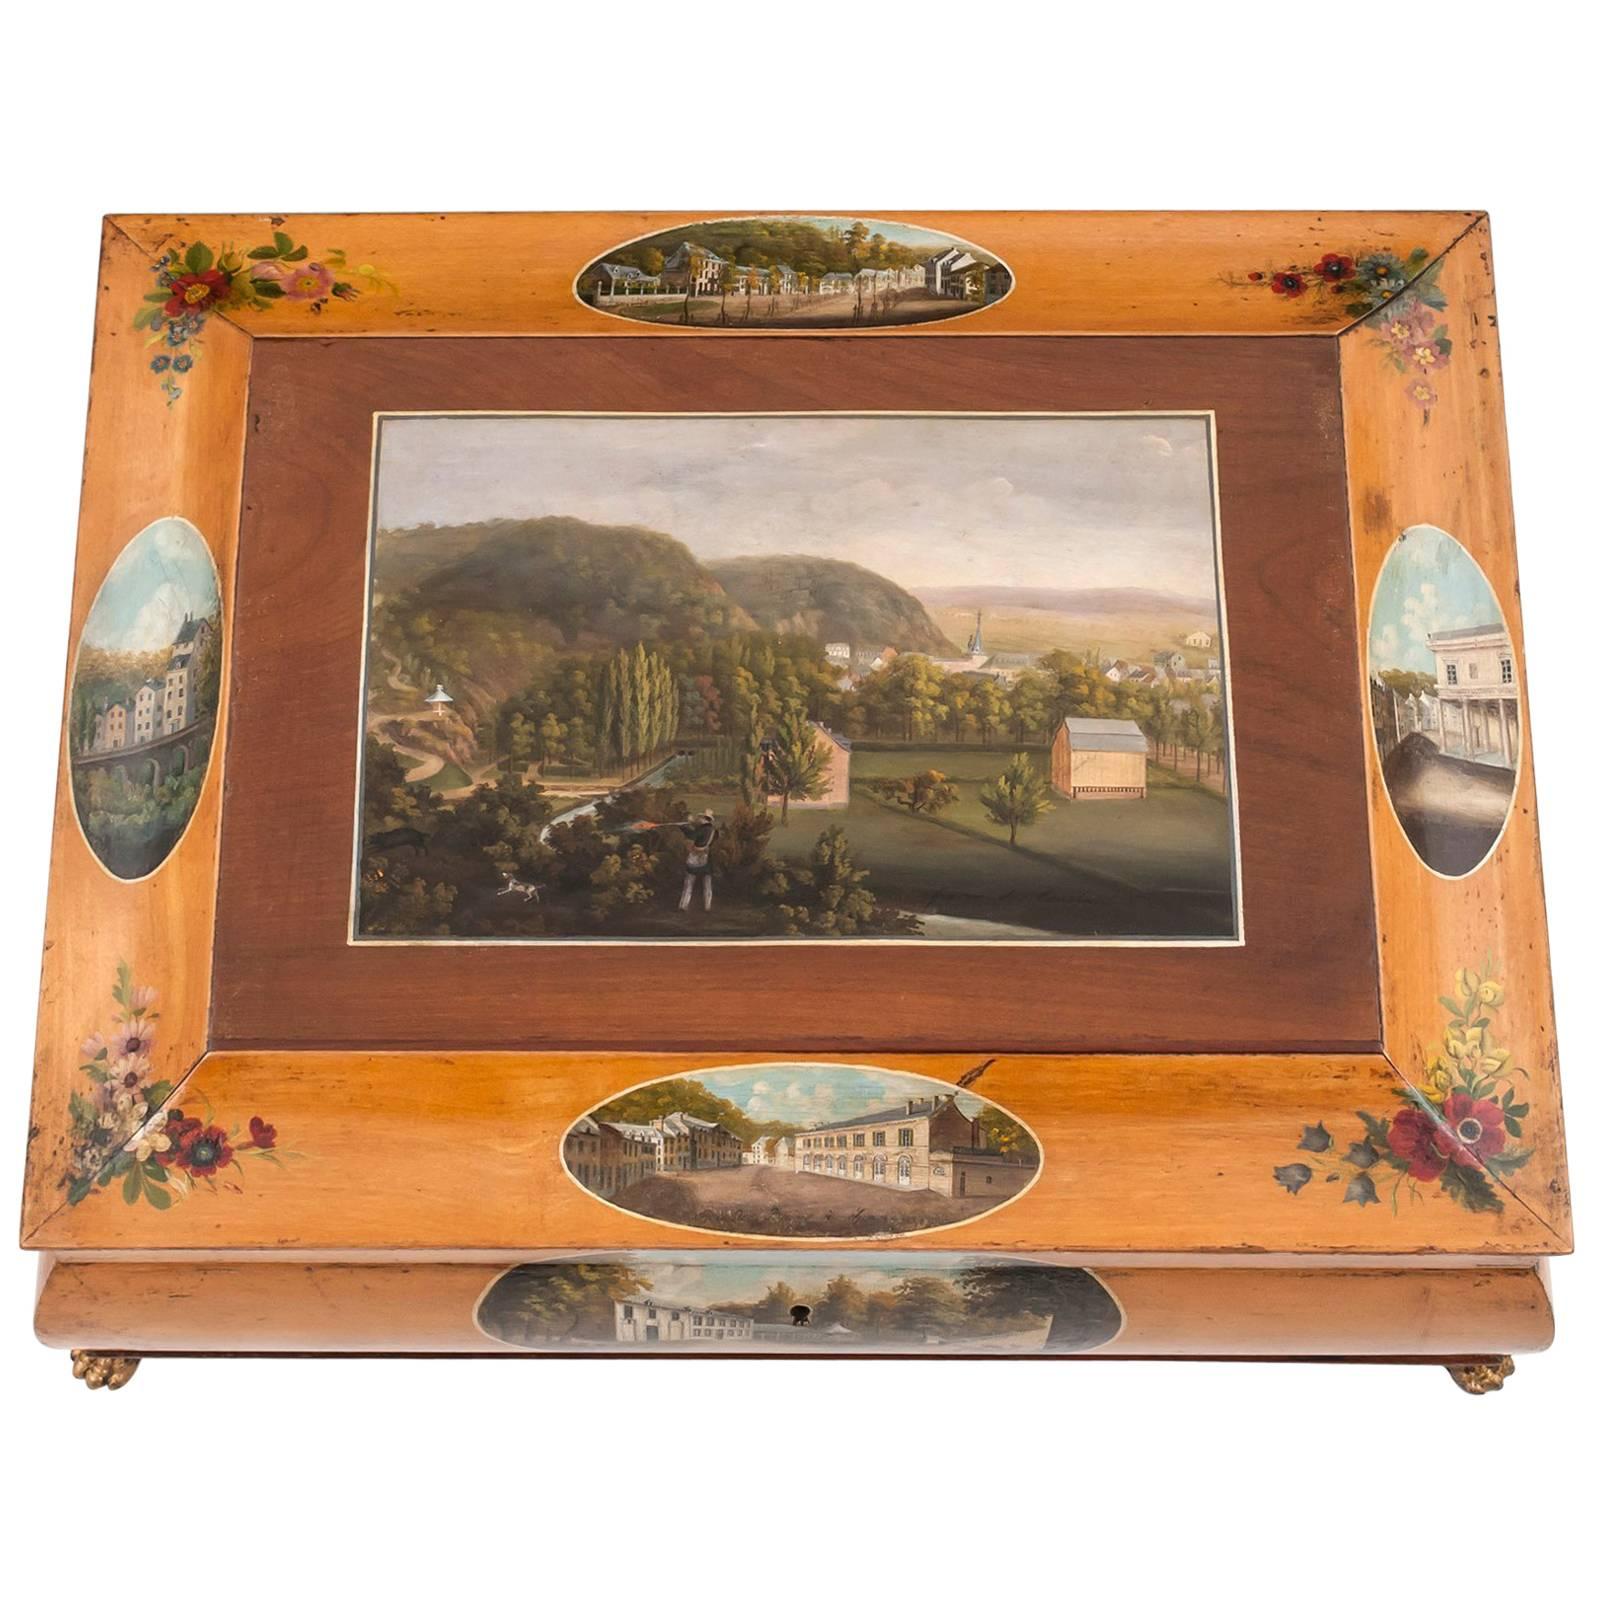 Antique Birch and Sycamore Painted Spa Sewing Box, 19th Century